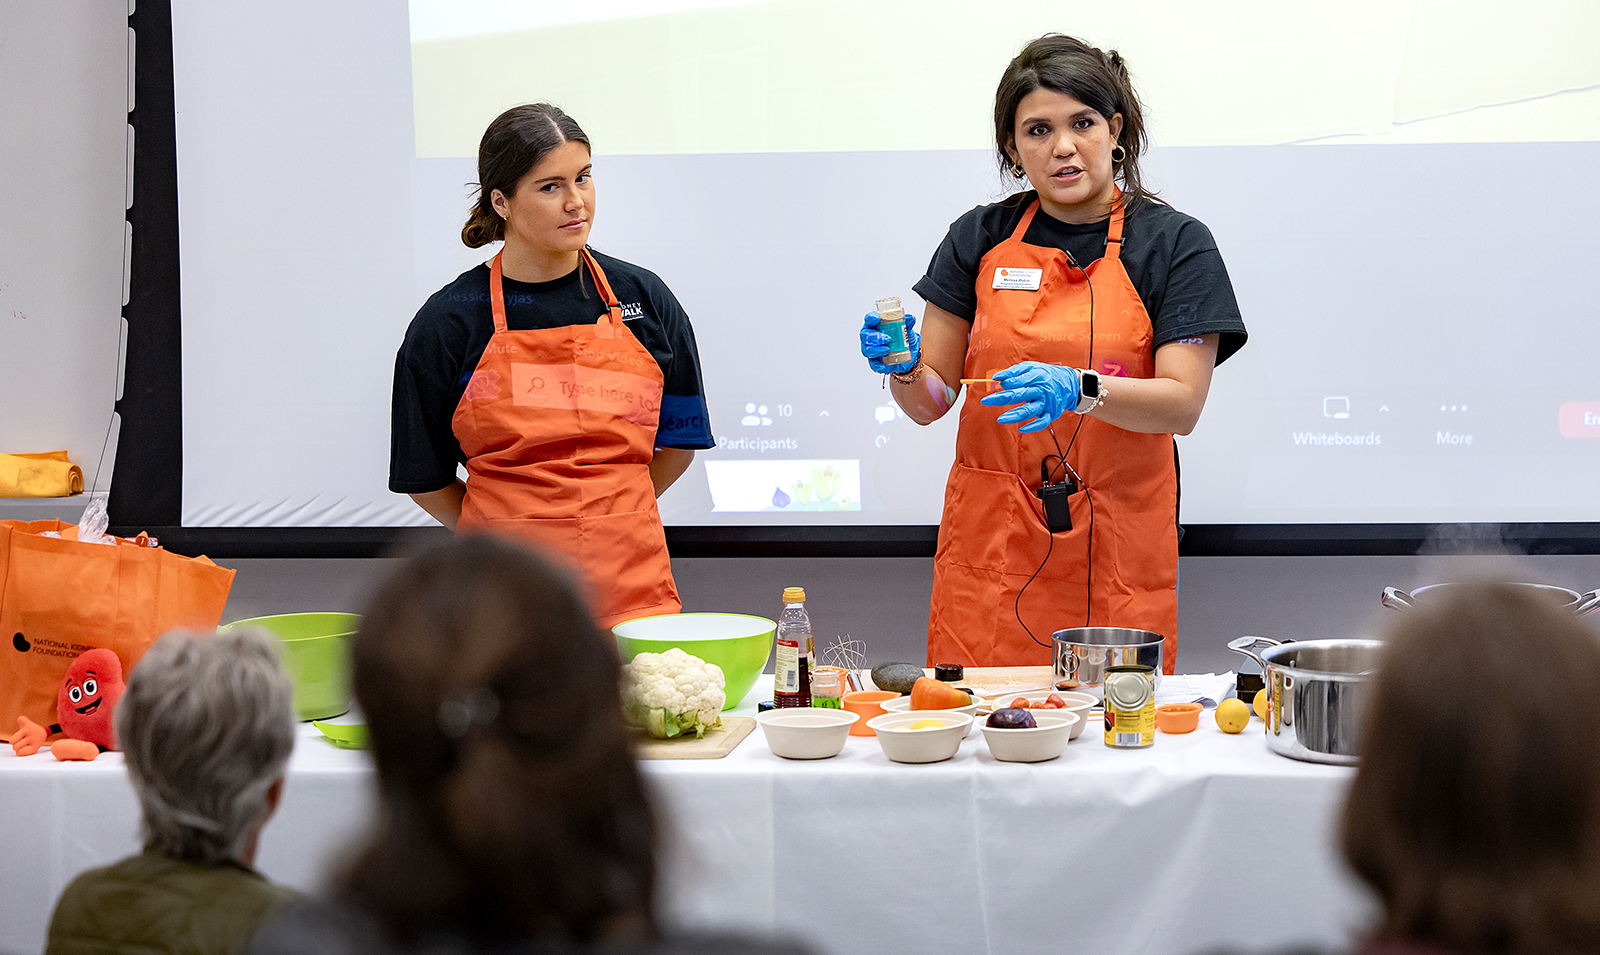 Two people performing a cooking demonstration